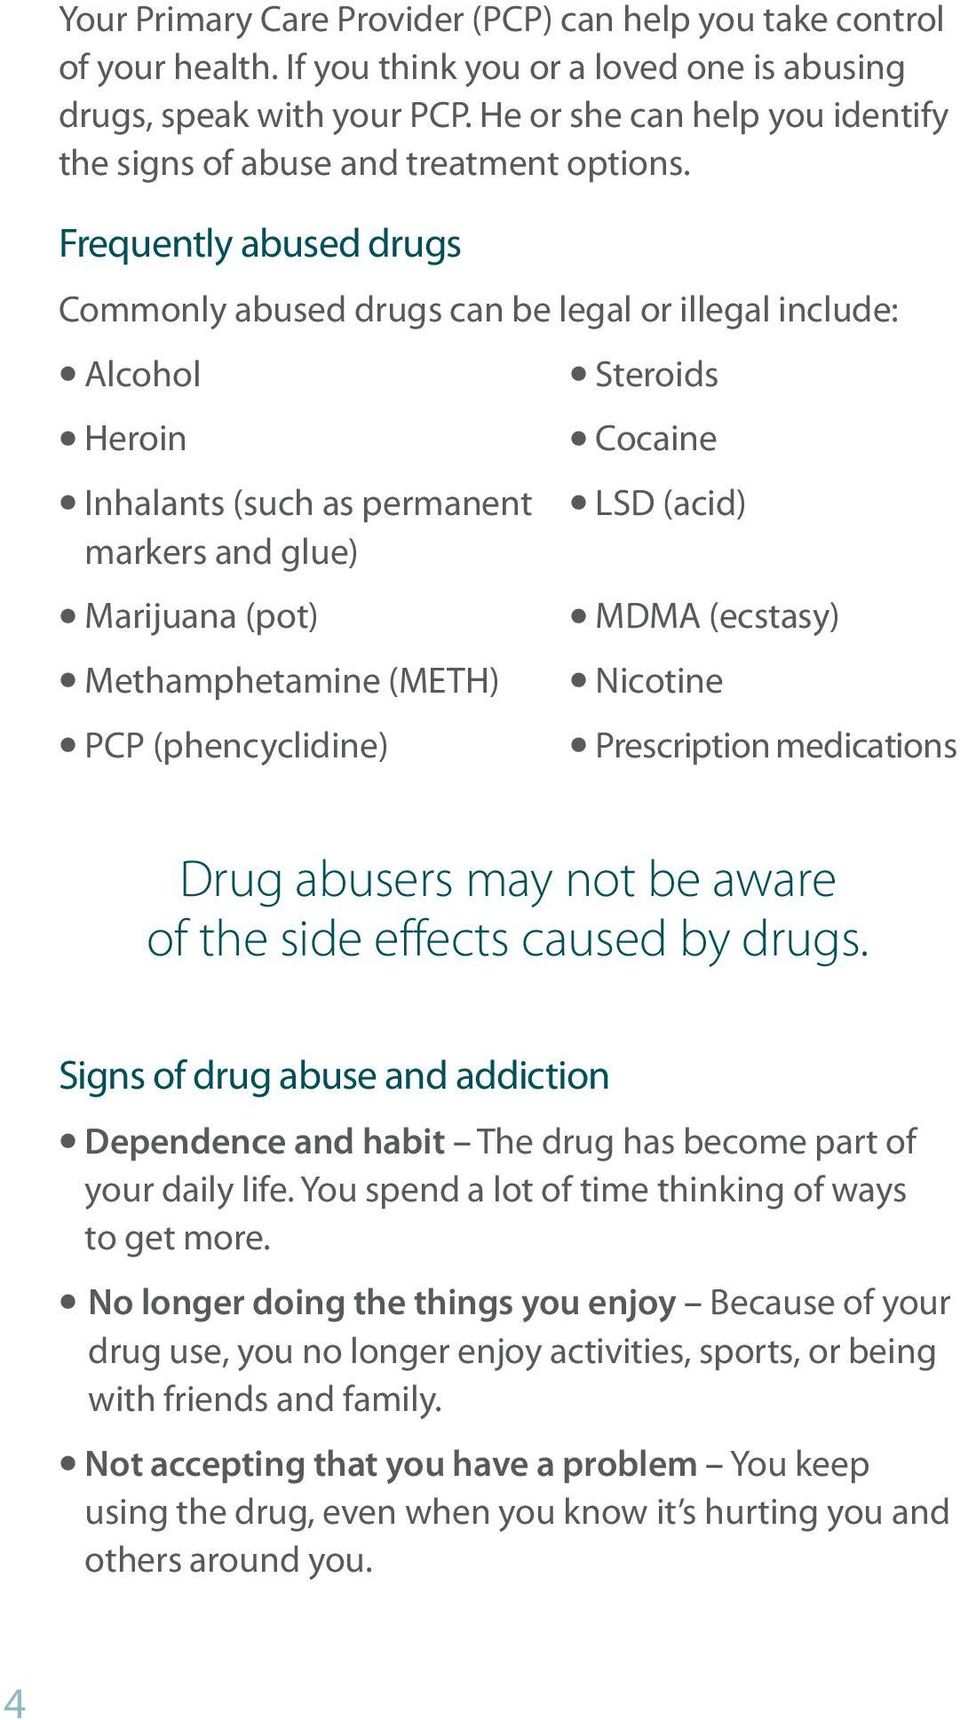 Frequently abused drugs Commonly abused drugs can be legal or illegal include: Alcohol Steroids Heroin Cocaine Inhalants (such as permanent LSD (acid) markers and glue) Marijuana (pot) MDMA (ecstasy)